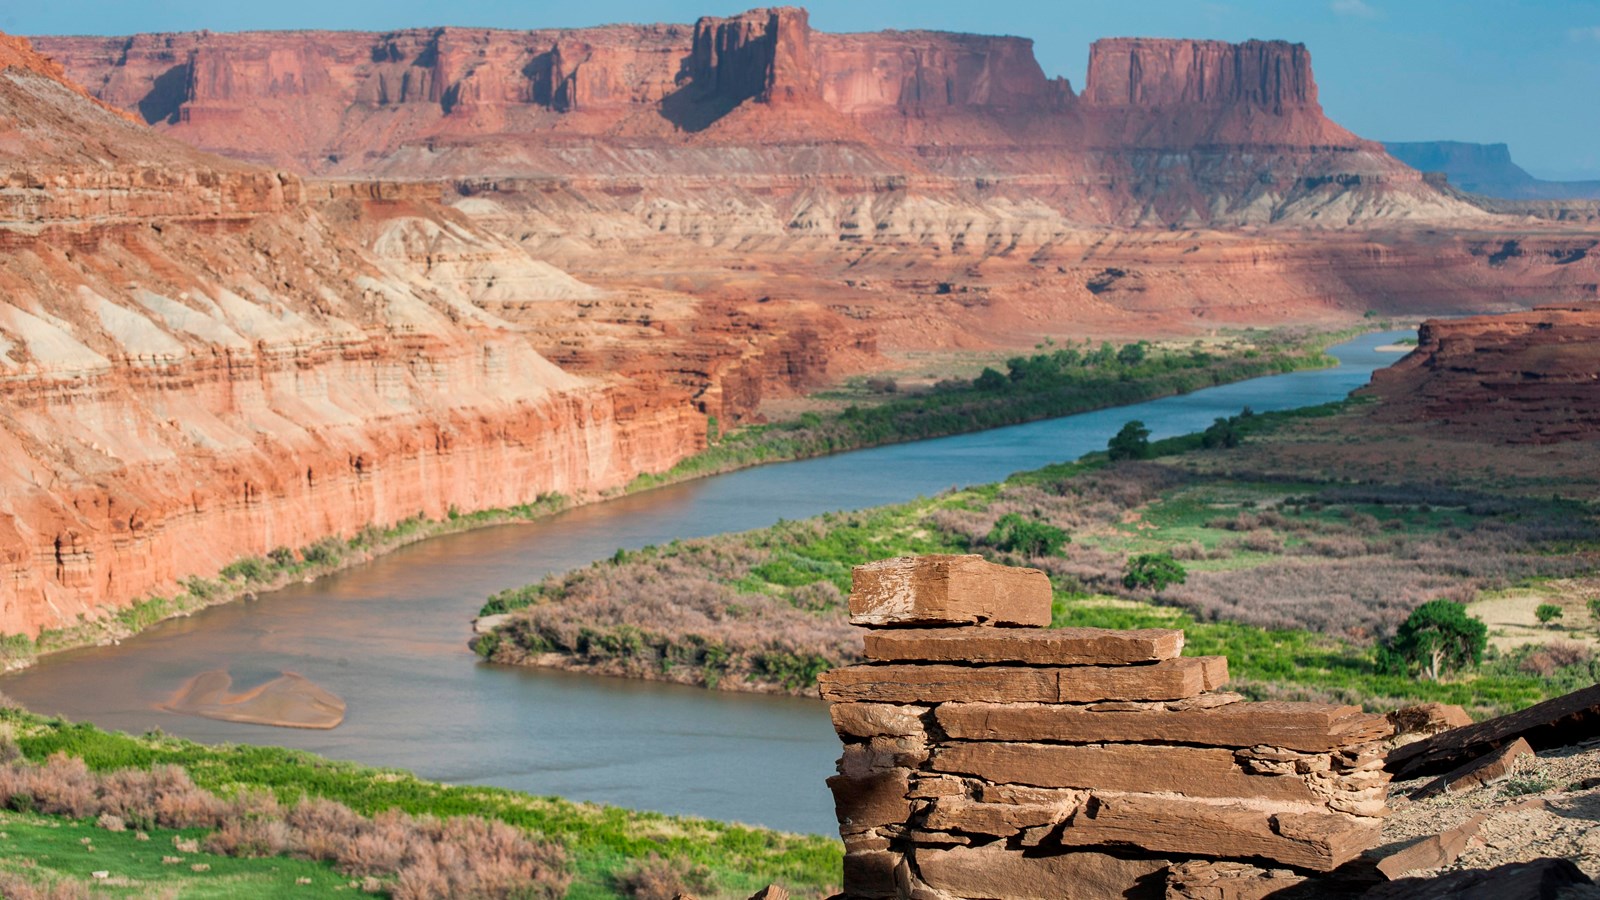 Stacked sandstone slabs sit atop a cliff overlooking the green river.